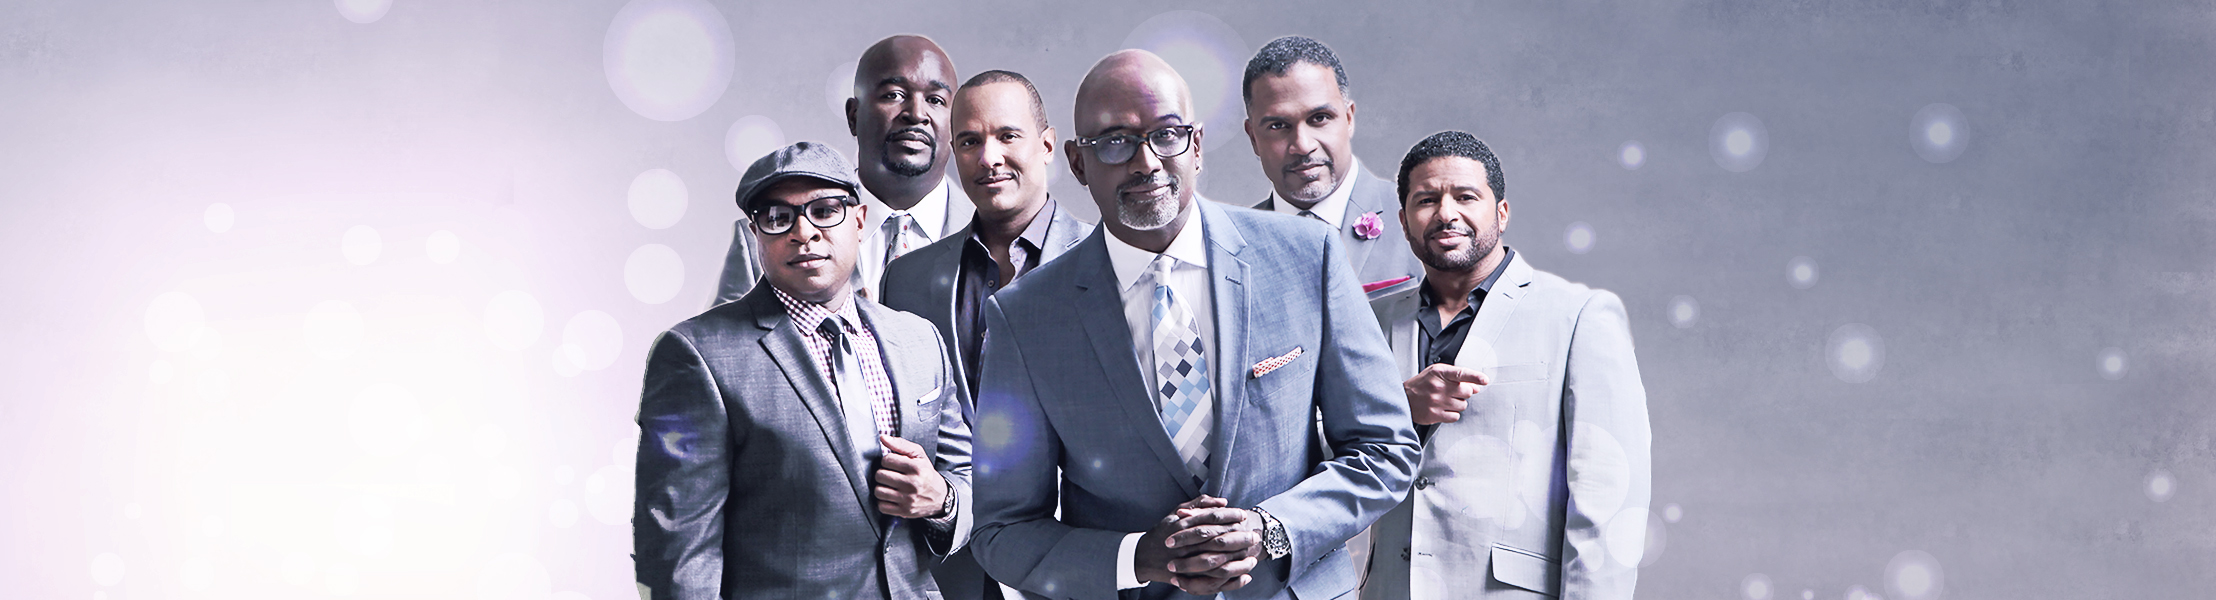 Take 6 - The Carver Community Cultural Center